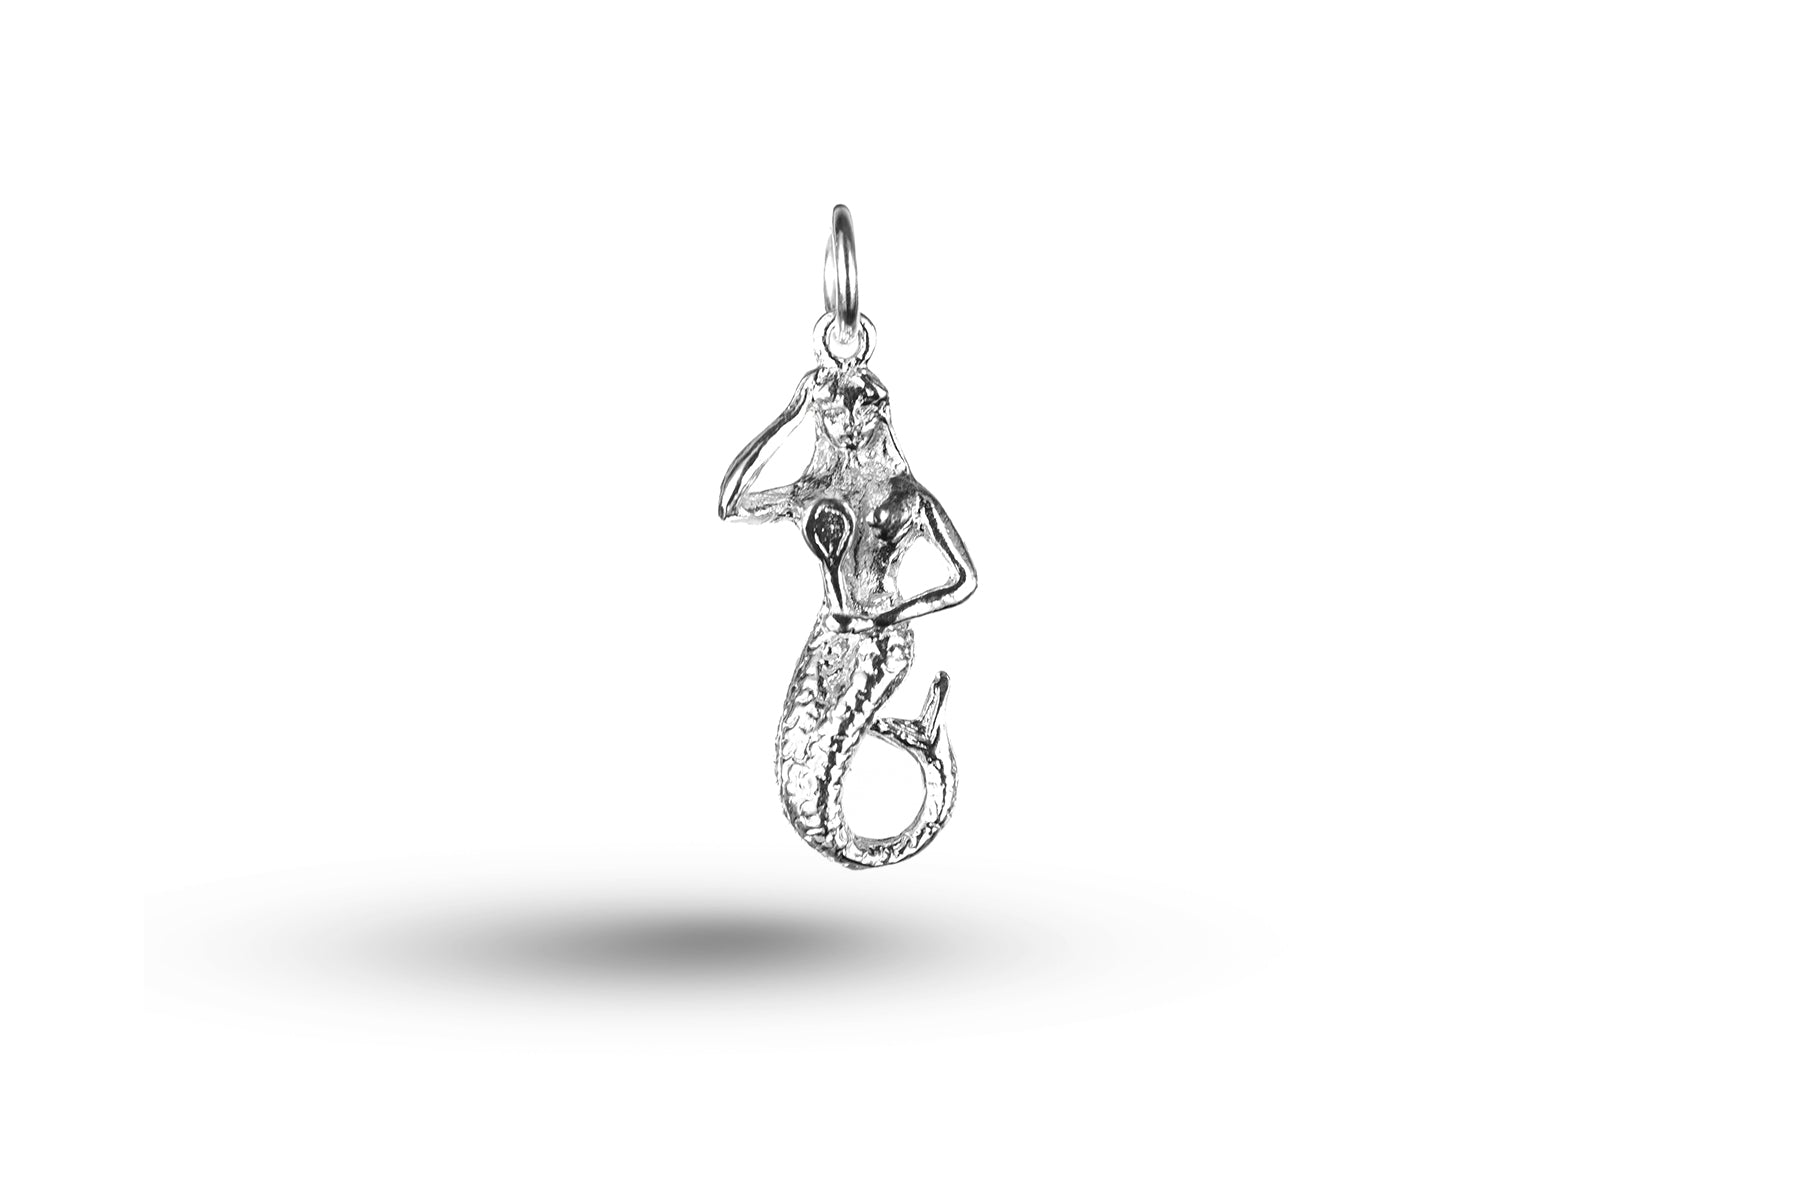 White gold Mermaid and Looking Glass charm.